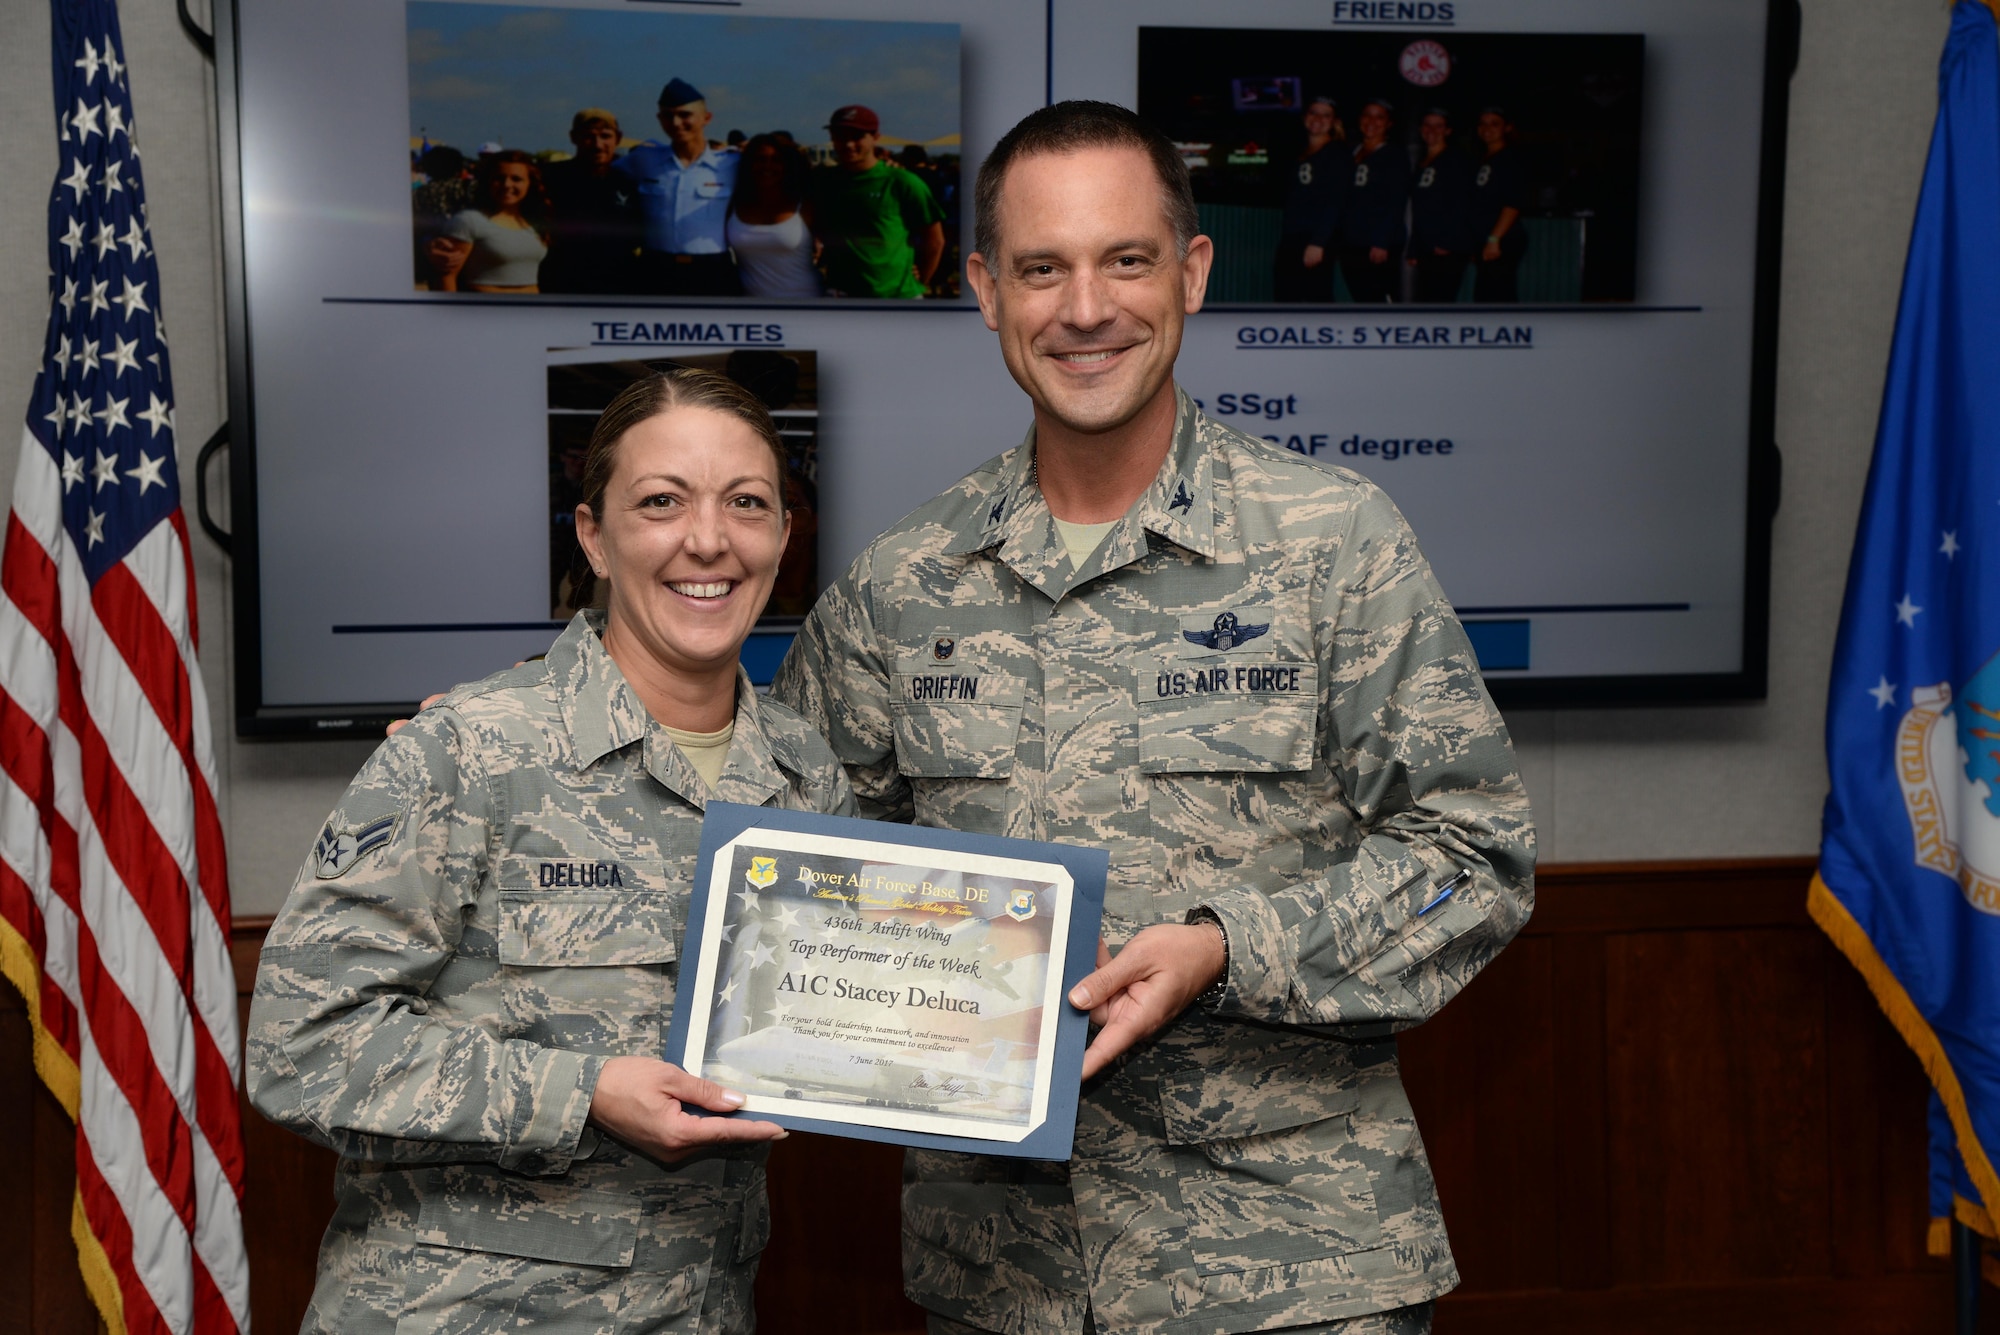 Col. Ethan Griffin, 436th Airlift Wing commander, presents the Top Performer of the Week award to Airman 1st Class Stacey Deluca, 436th Maintenance Squadron Regional Isochronal Inspection Dock consolidated tool krib custodian, during the weekly wing stand up meeting June 7, 2017, at Dover Air Force Base, Del. Deluca was recognized for her outstanding performance above and beyond that expected of an airman first class. (U.S. Air Force photo by Senior Airman Aaron J. Jenne)